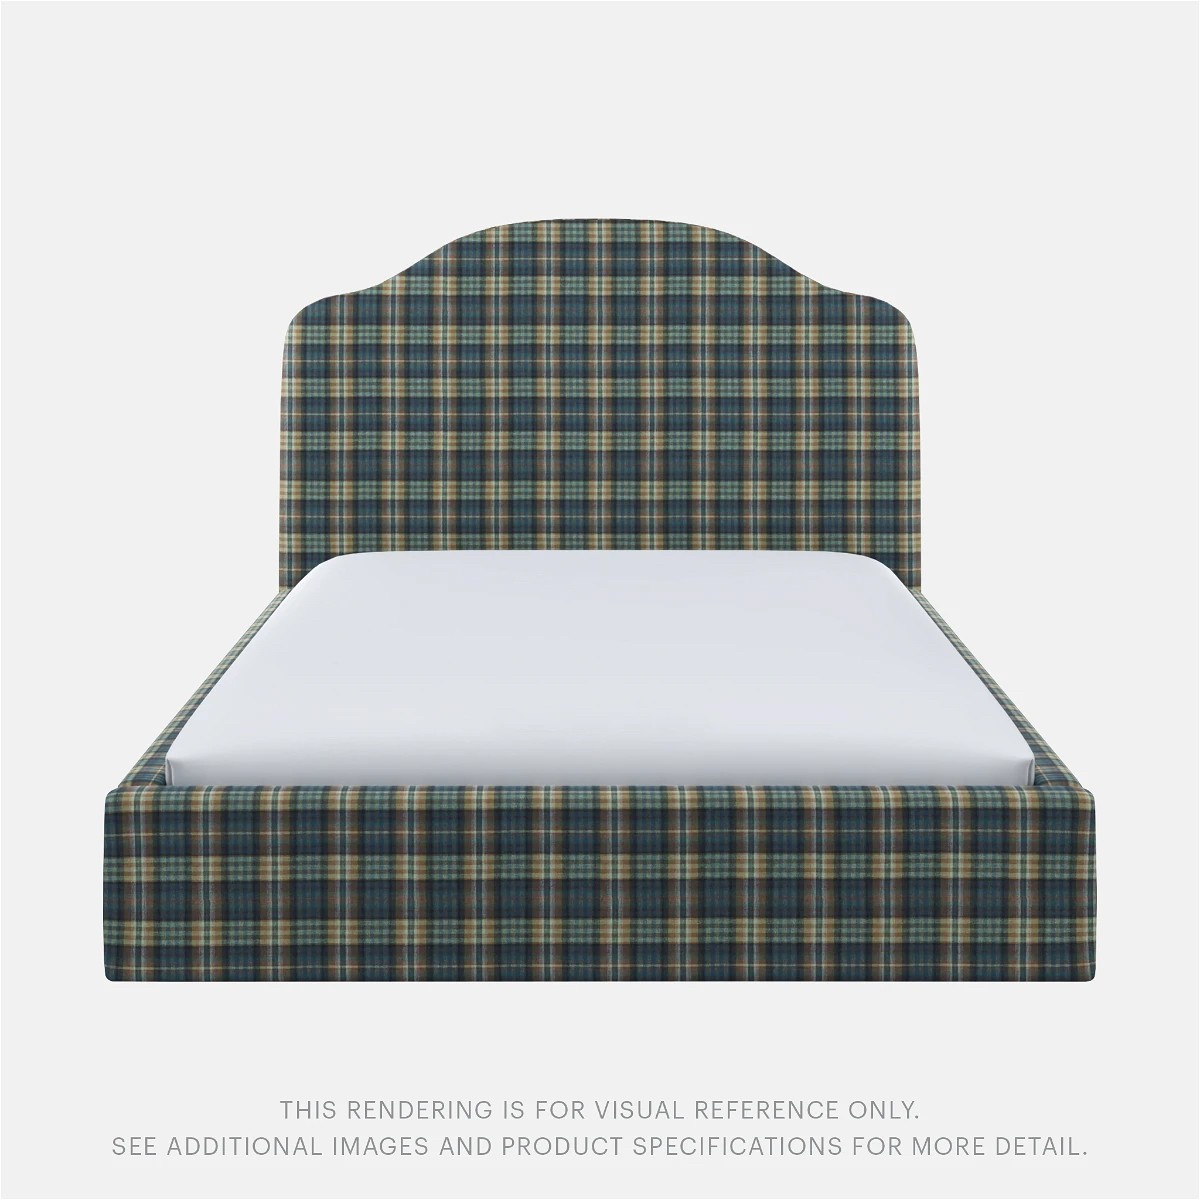 The image of an Hearst Bed product